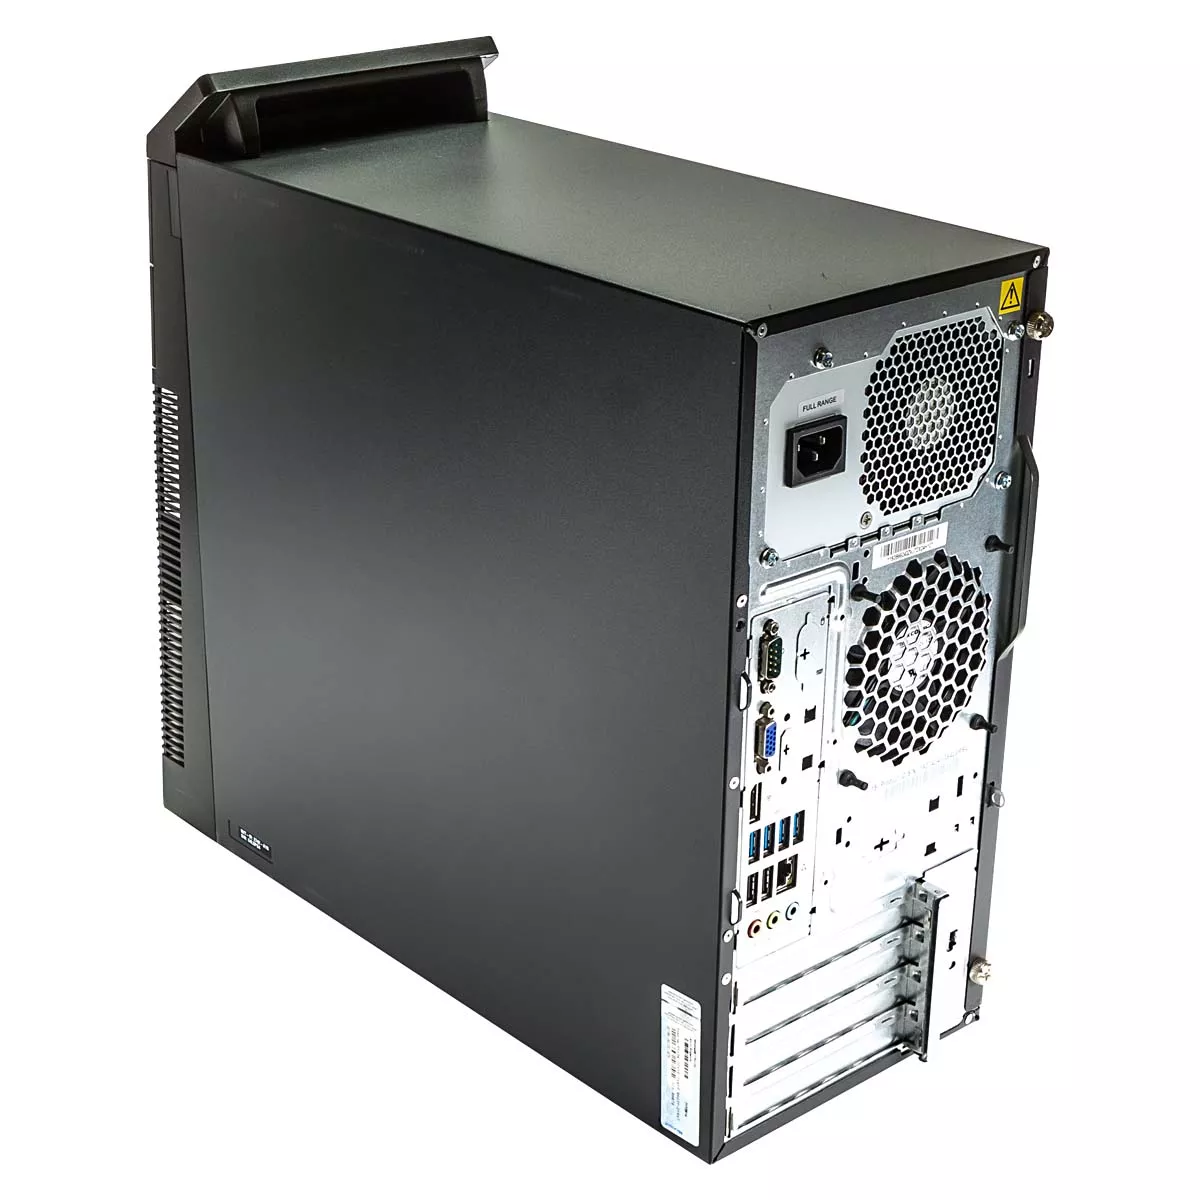 Lenovo Thinkcentre M83 Tower Core i5 4590 3,3 GHz